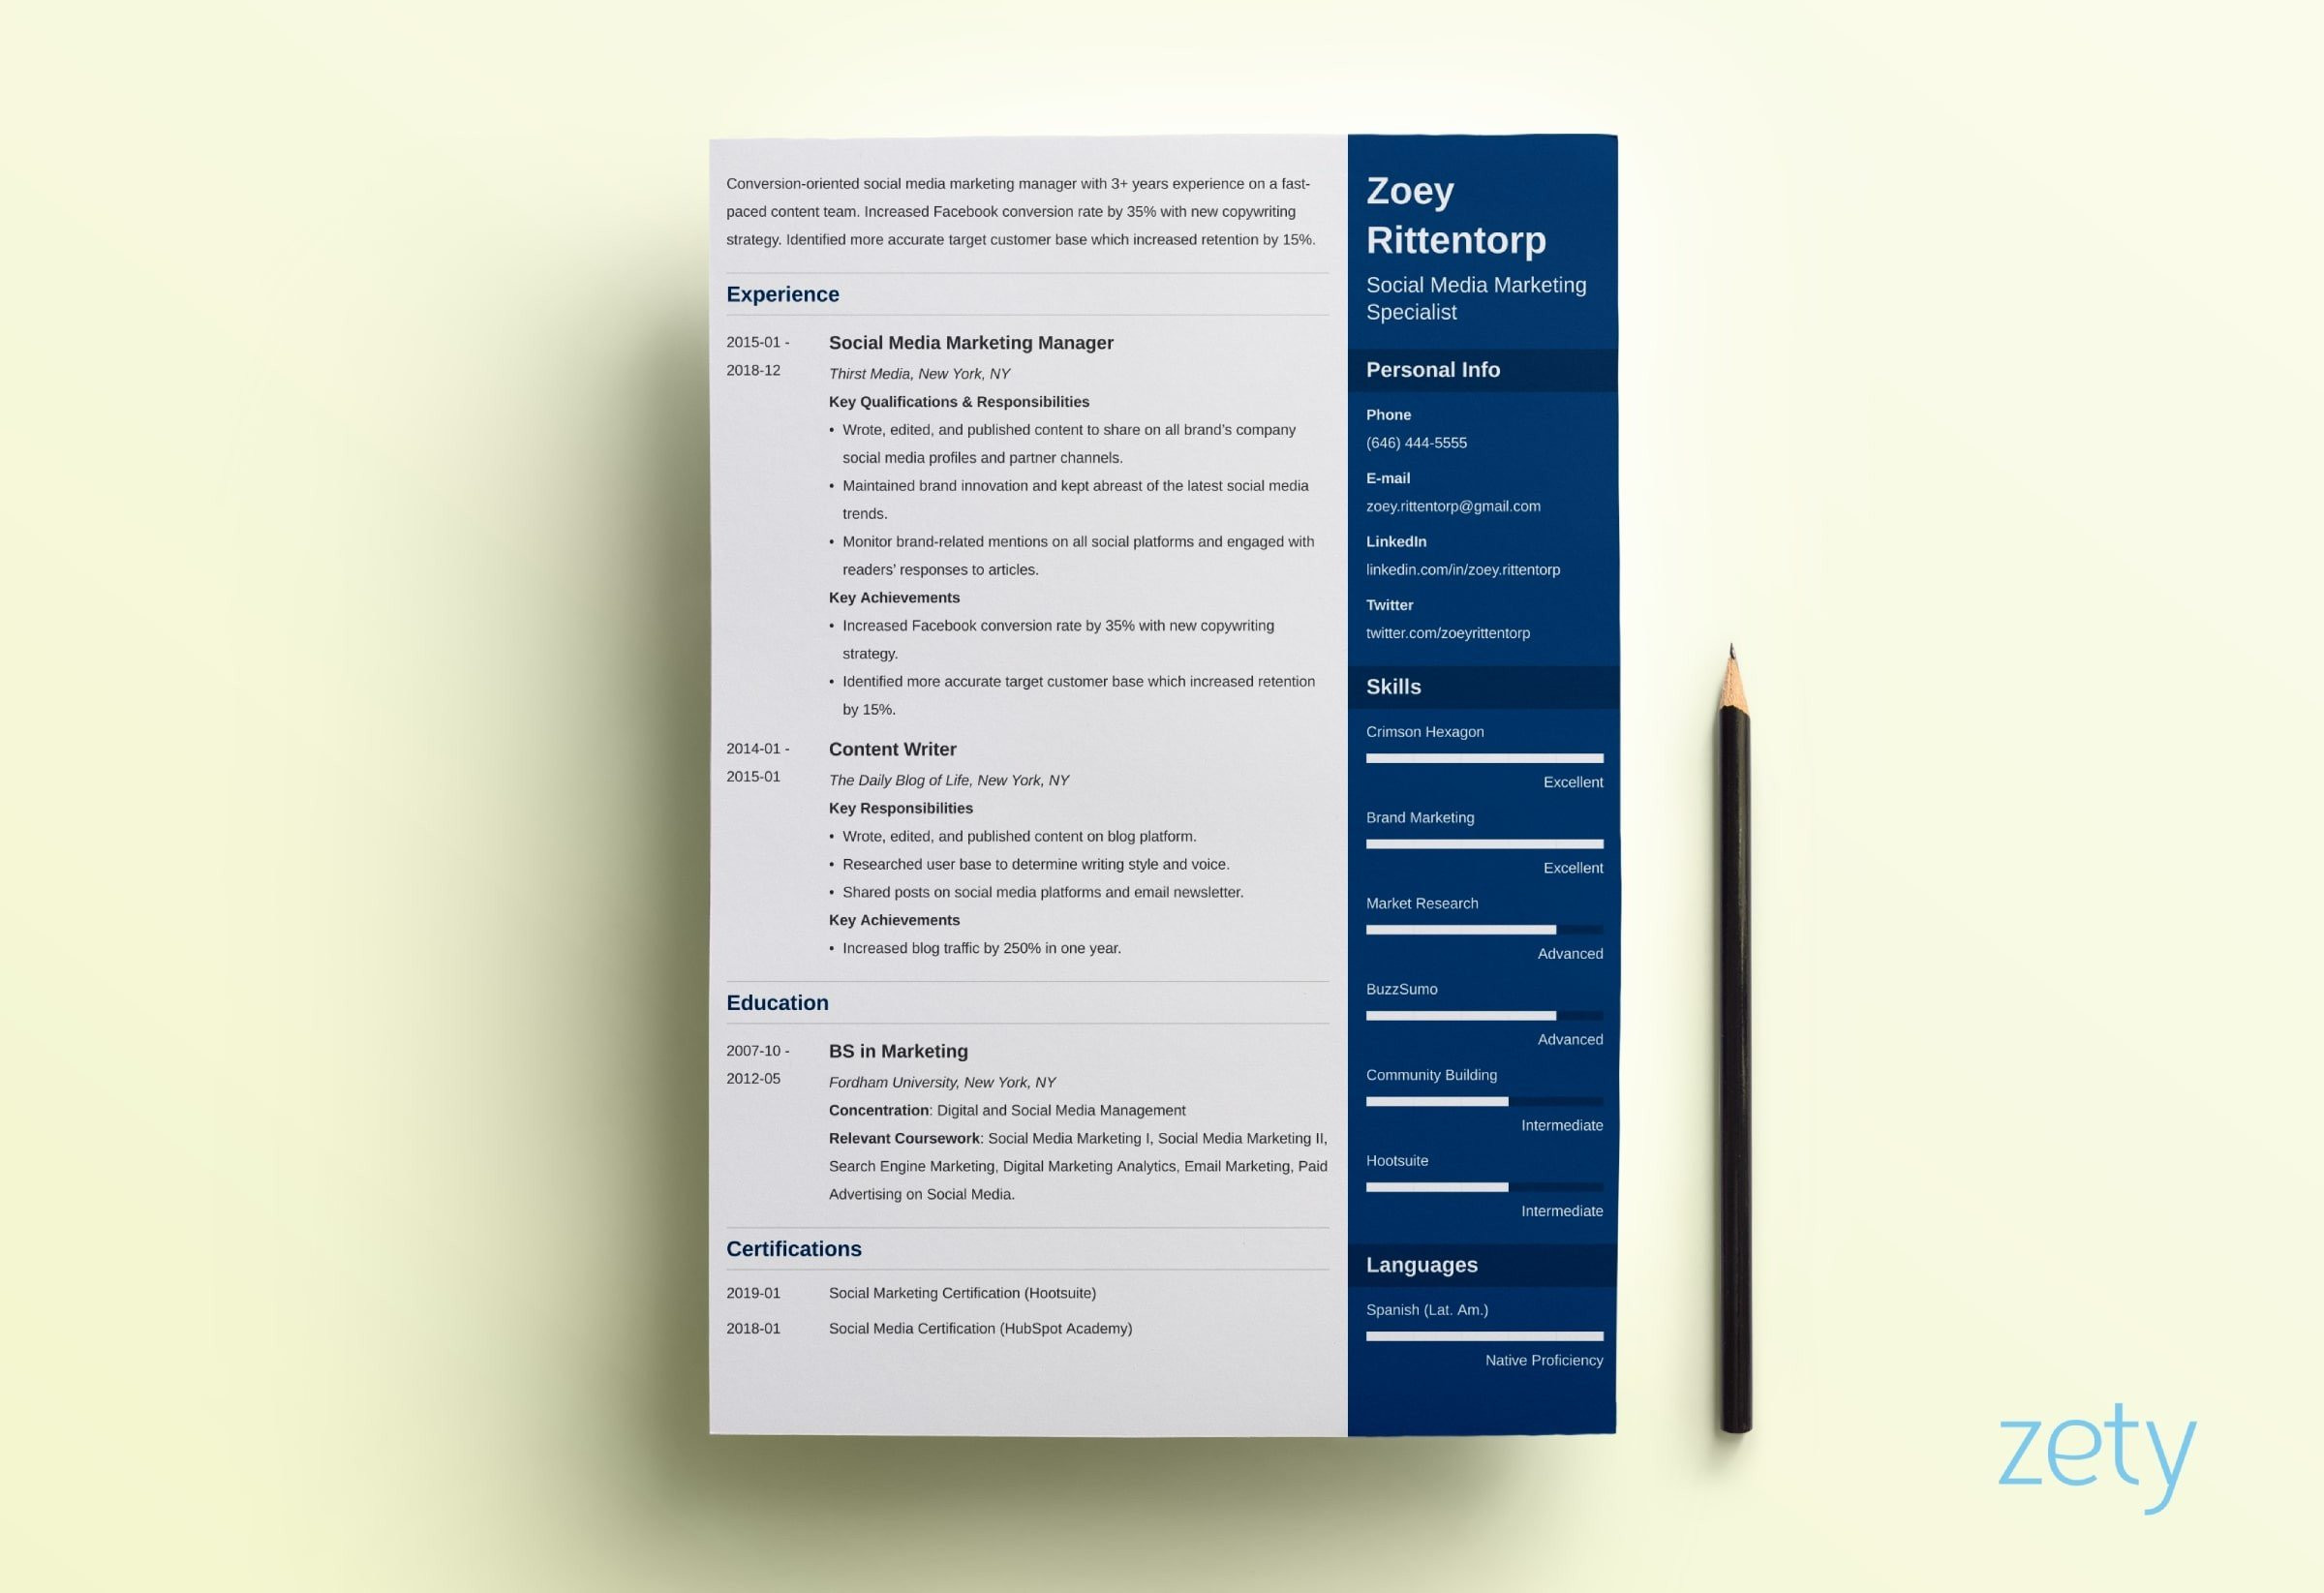 Sample Resume Skills On One Line 15 One Page Resume Templates to Fill-in & Download